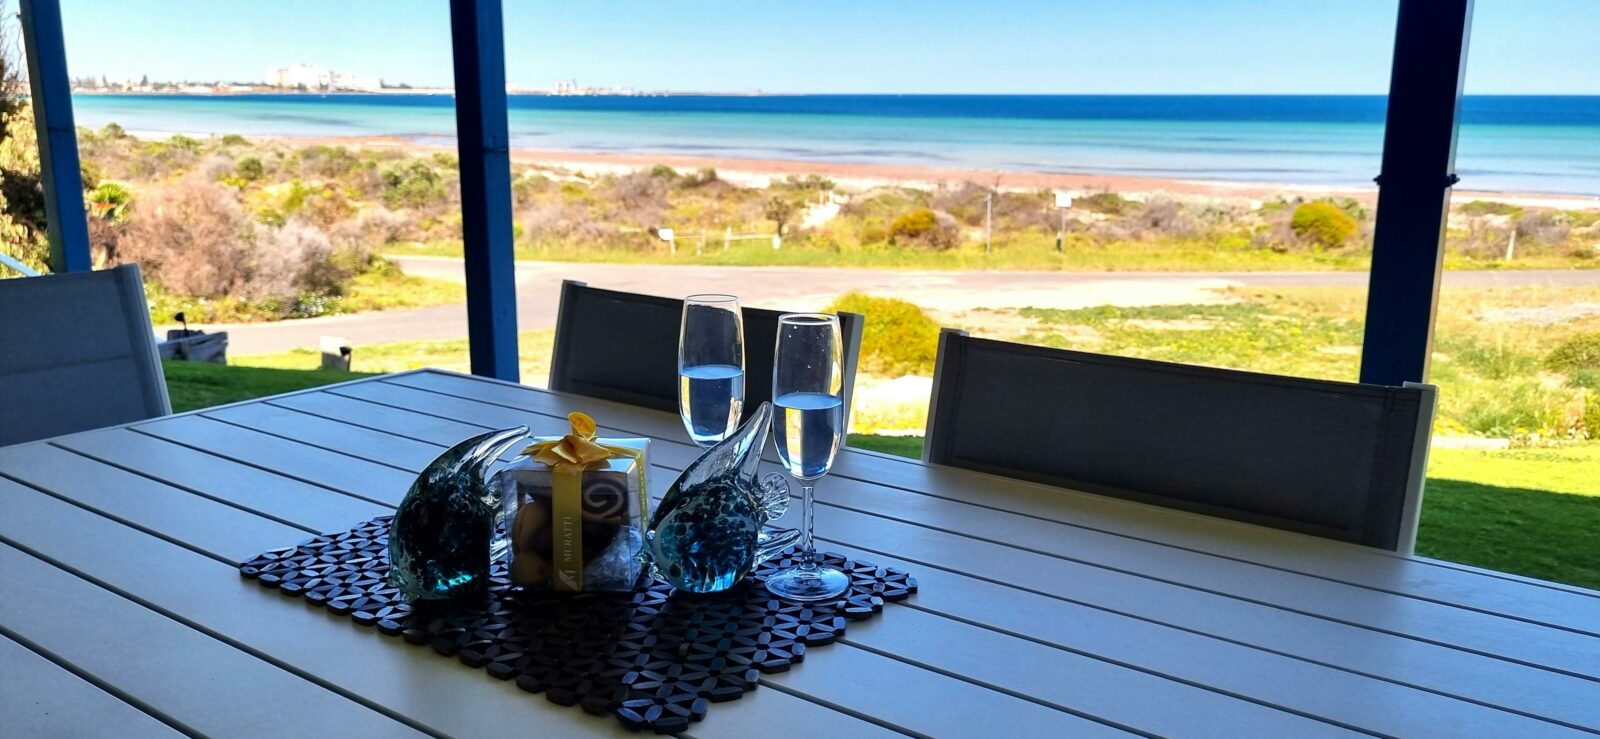 Our outdoor dining table looking out over Wallaroo Beach